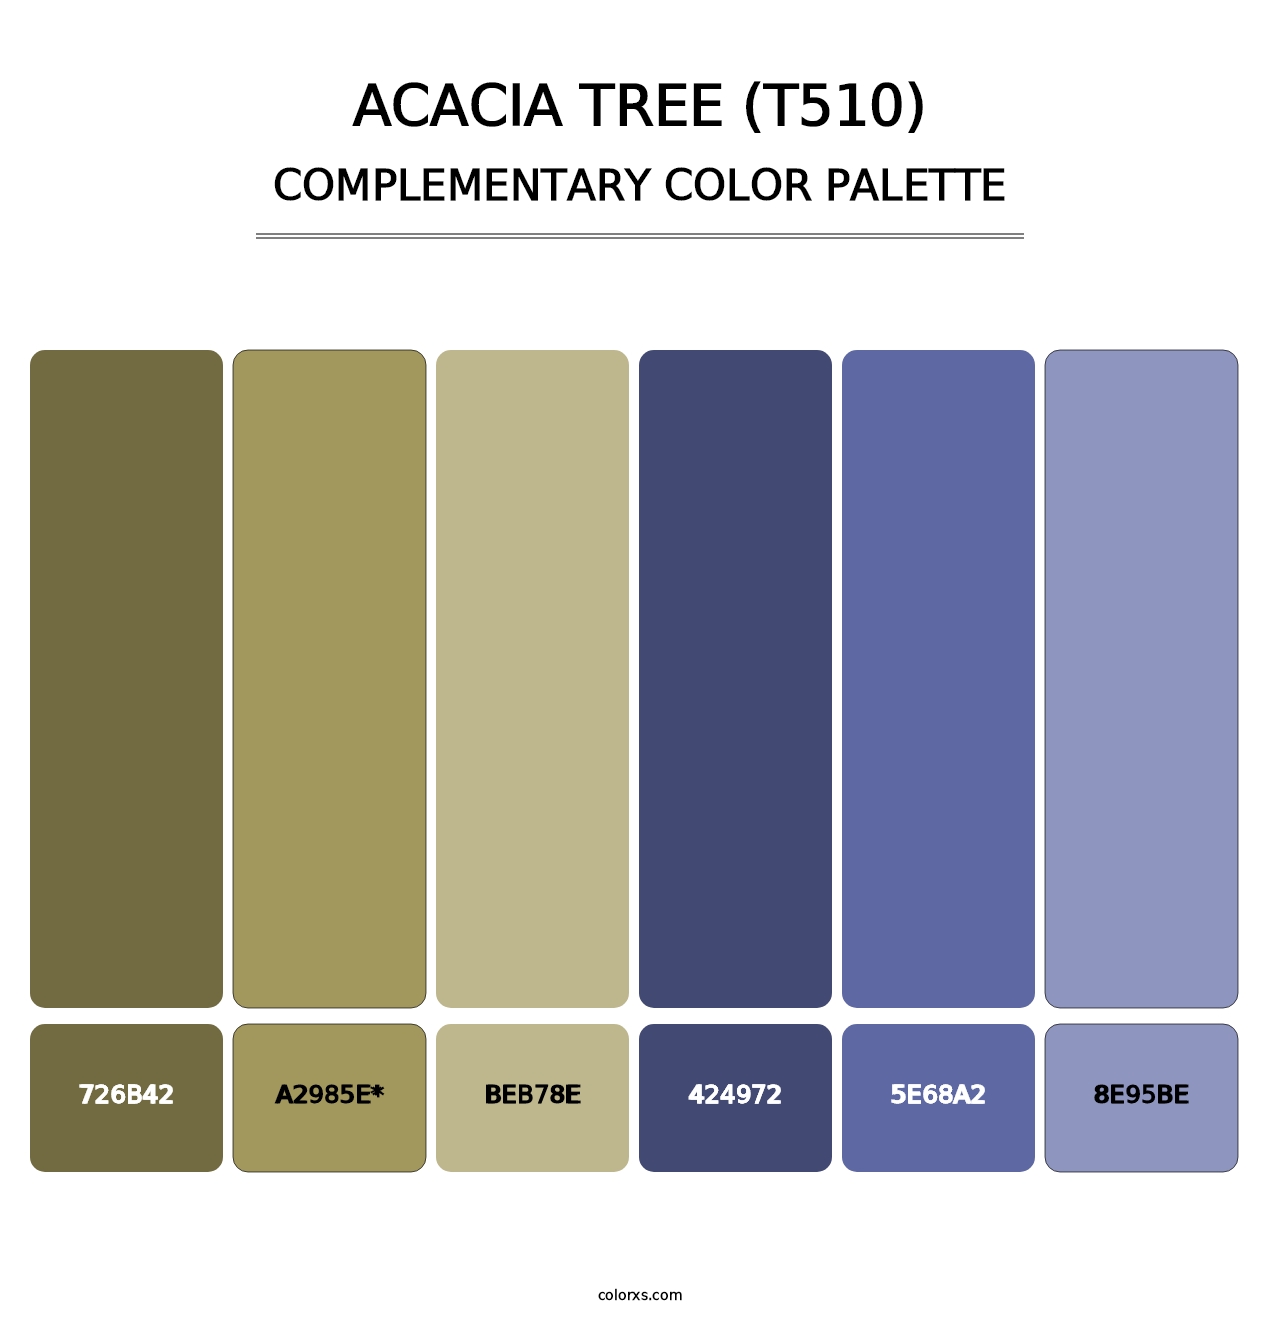 Acacia Tree (T510) - Complementary Color Palette